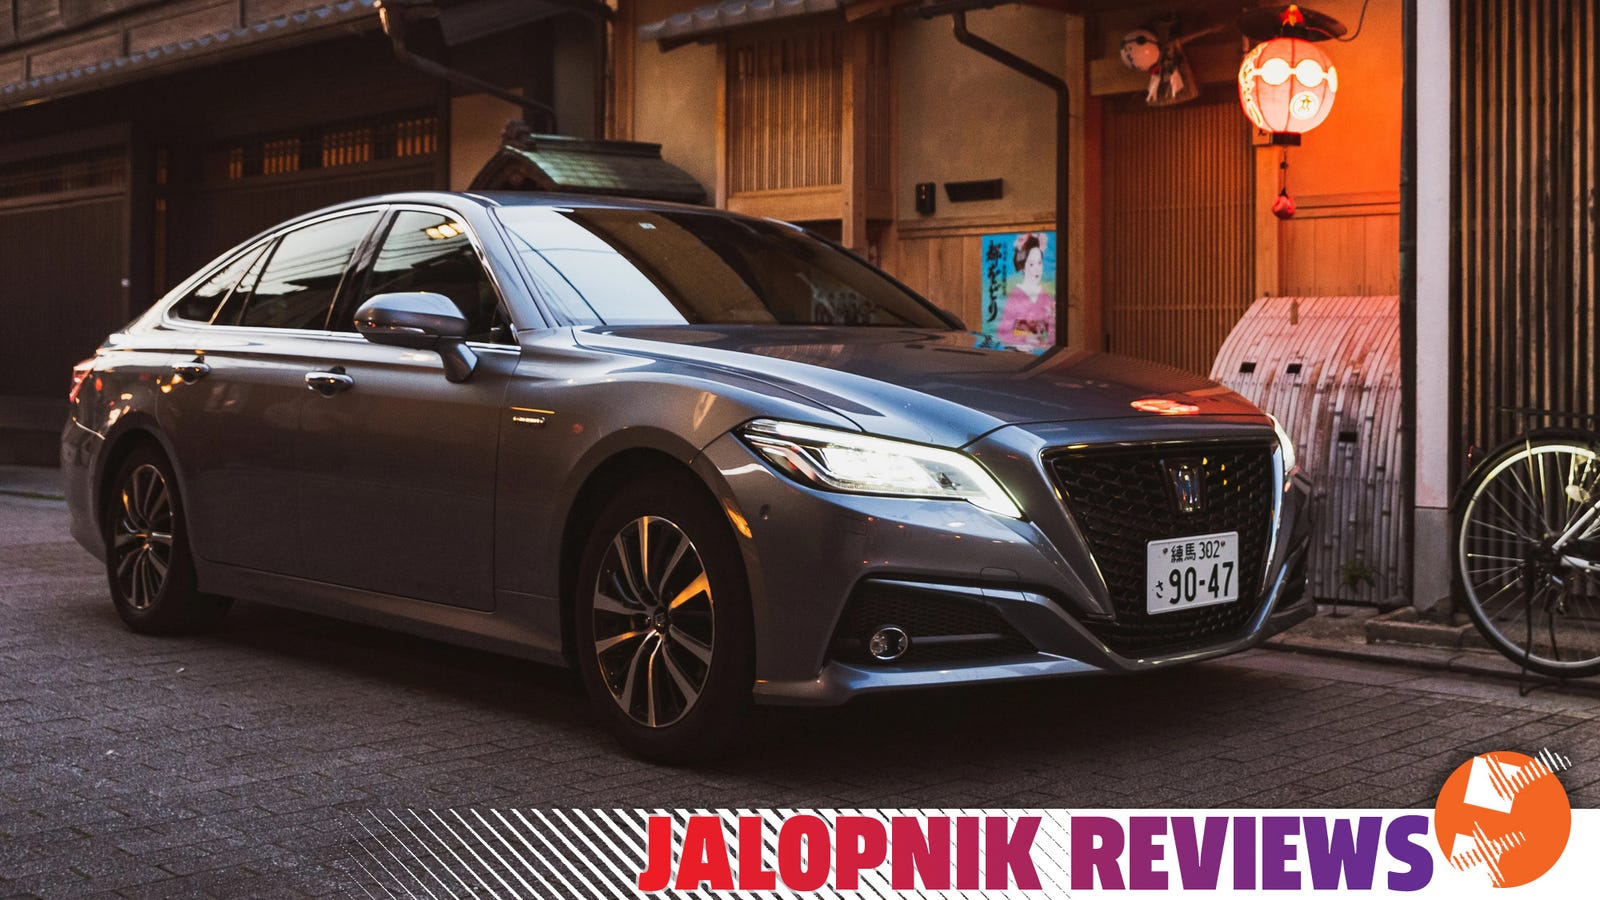 The 2019 Toyota Crown Is The Rwd Japanese Luxury Cruiser The